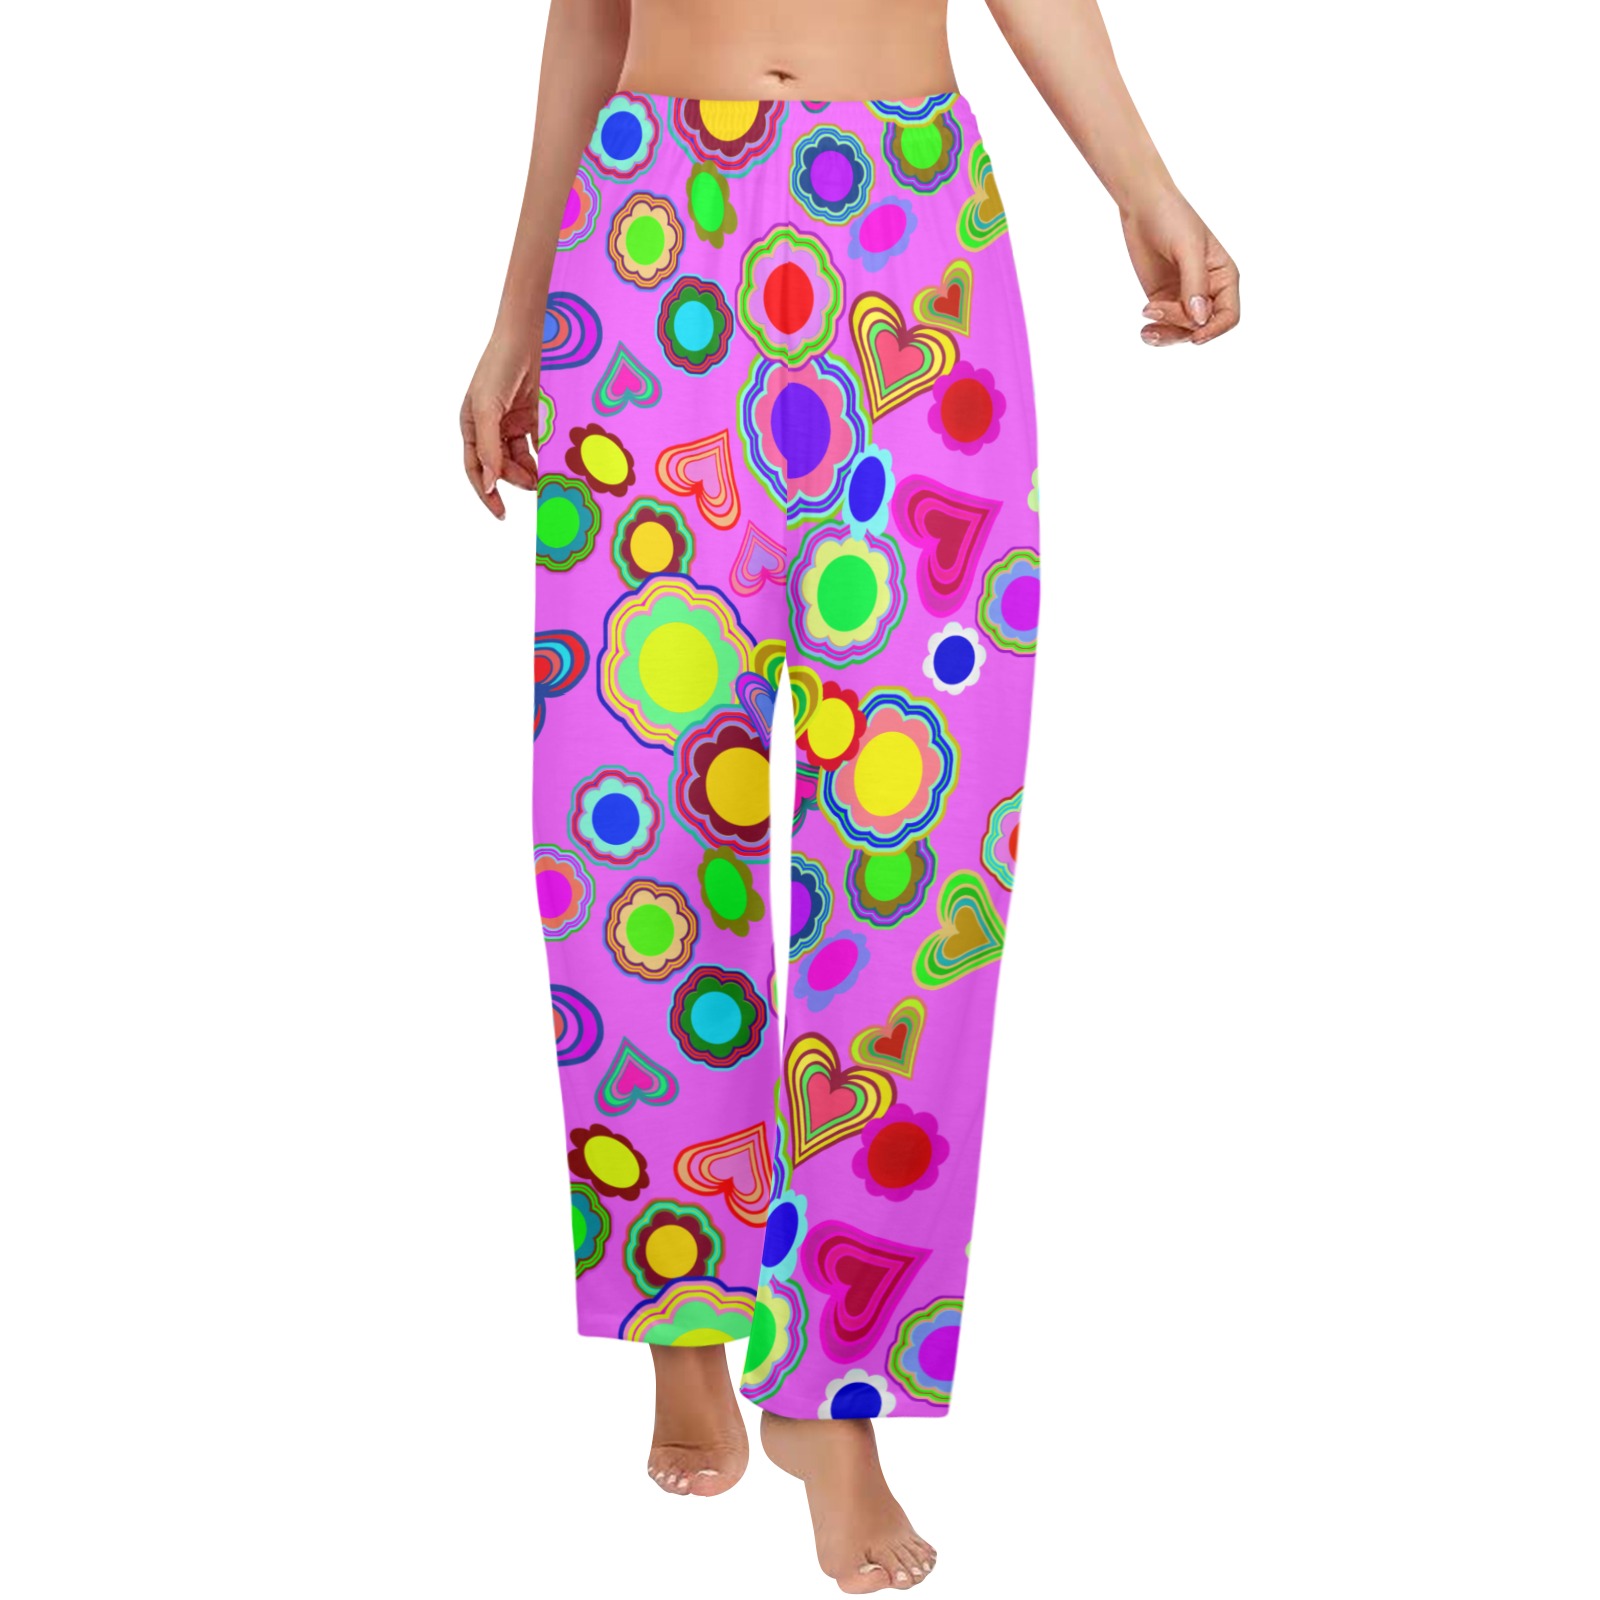 Groovy Hearts and Flowers Pink Women's Pajama Trousers without Pockets